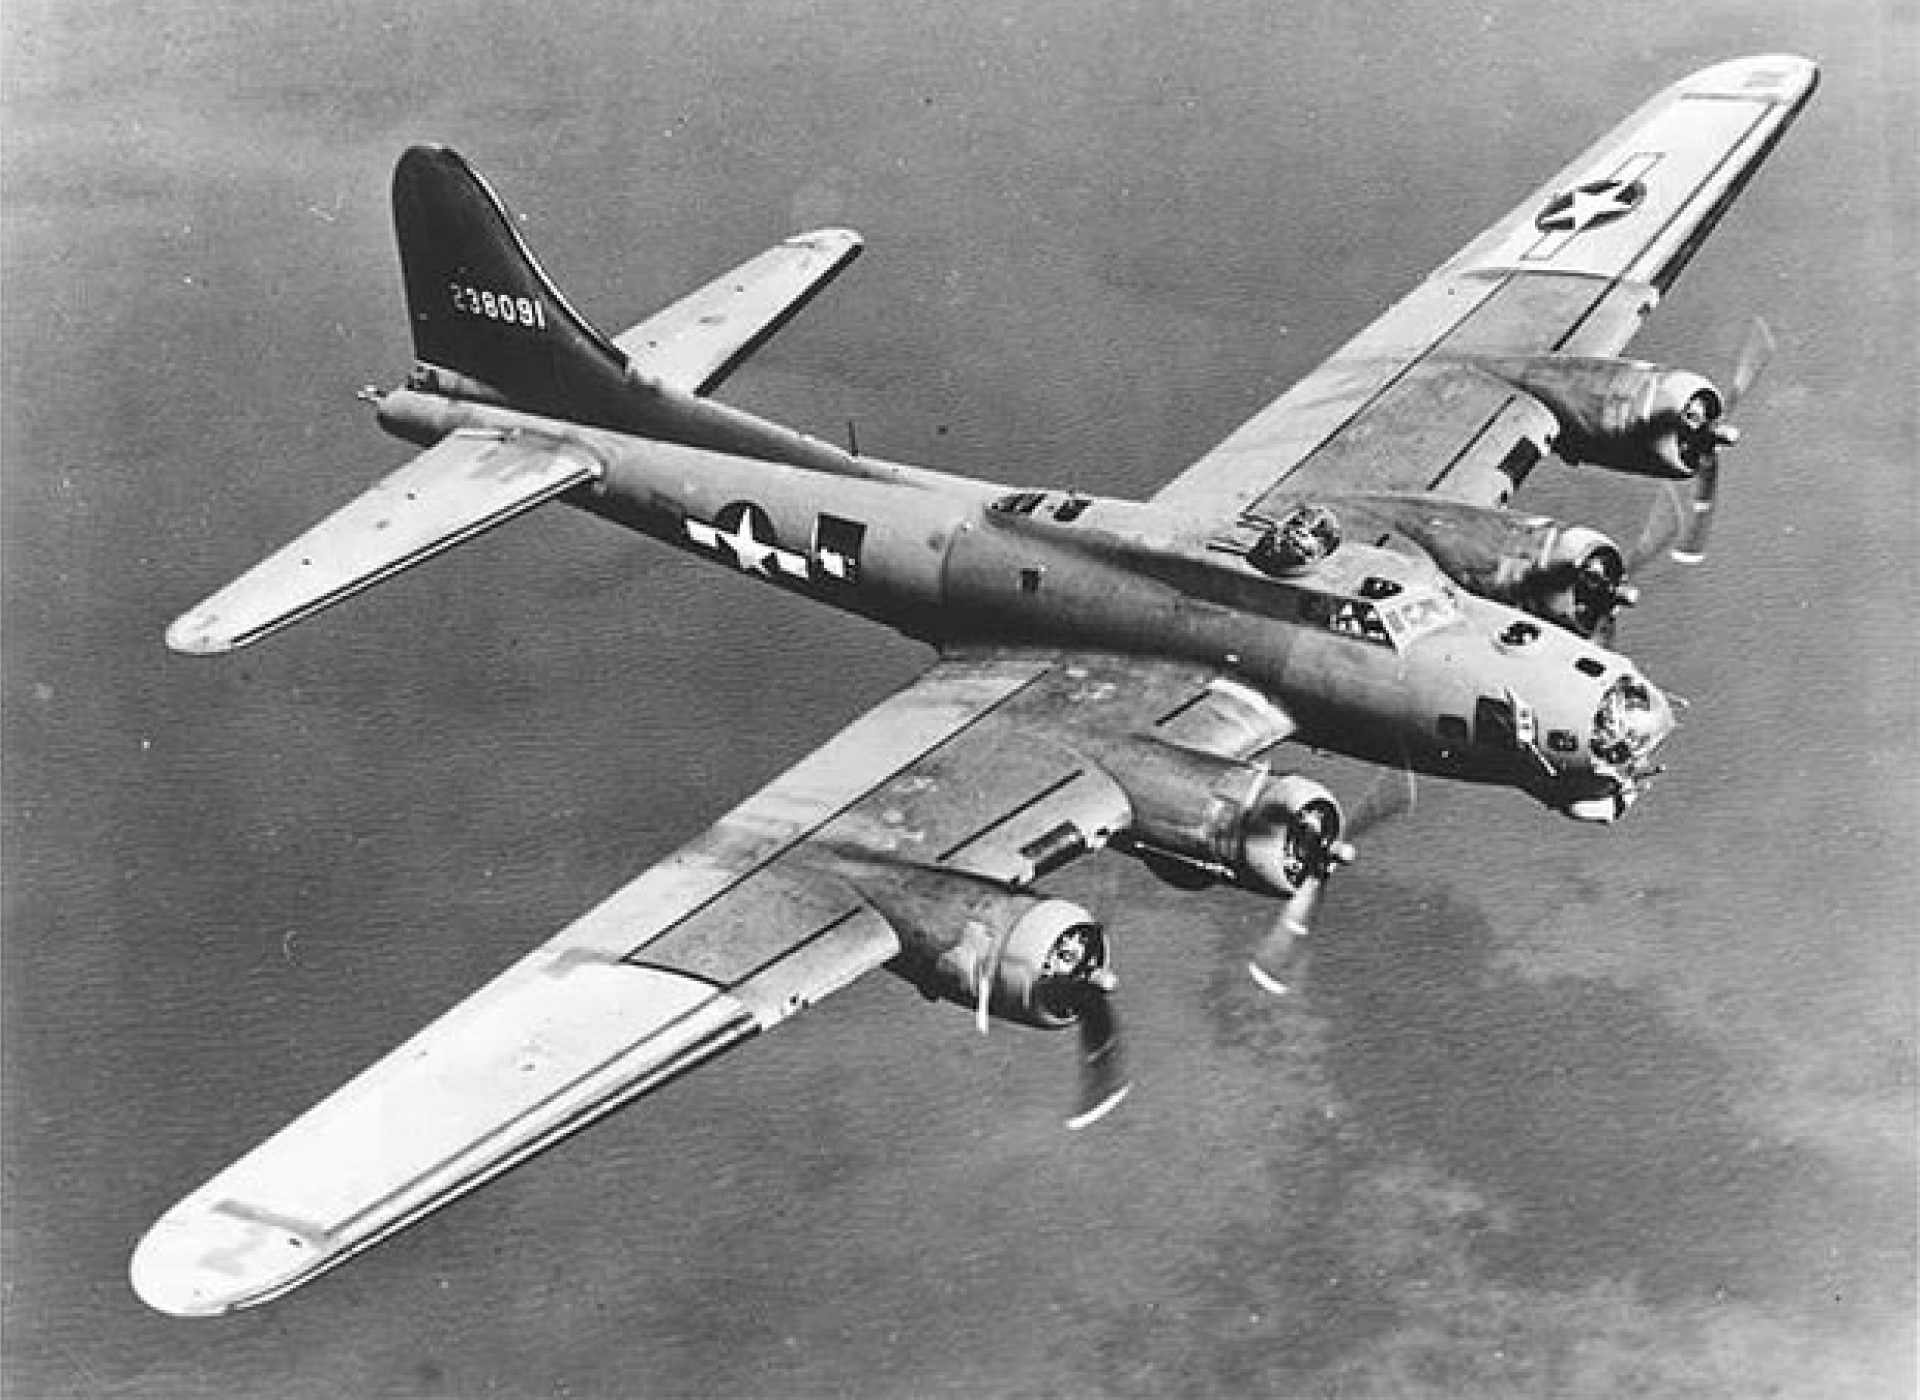 Caption: Boeing B-17 “Flying Fortress” levels off for a run over target over the Pacific Ocean. Citation: “B-17 Flying Fortress, Serial number 238091,” The Air Force Historical Research Agency, https://www.afhra.af.mil/Photos/mediagallery/gallery.